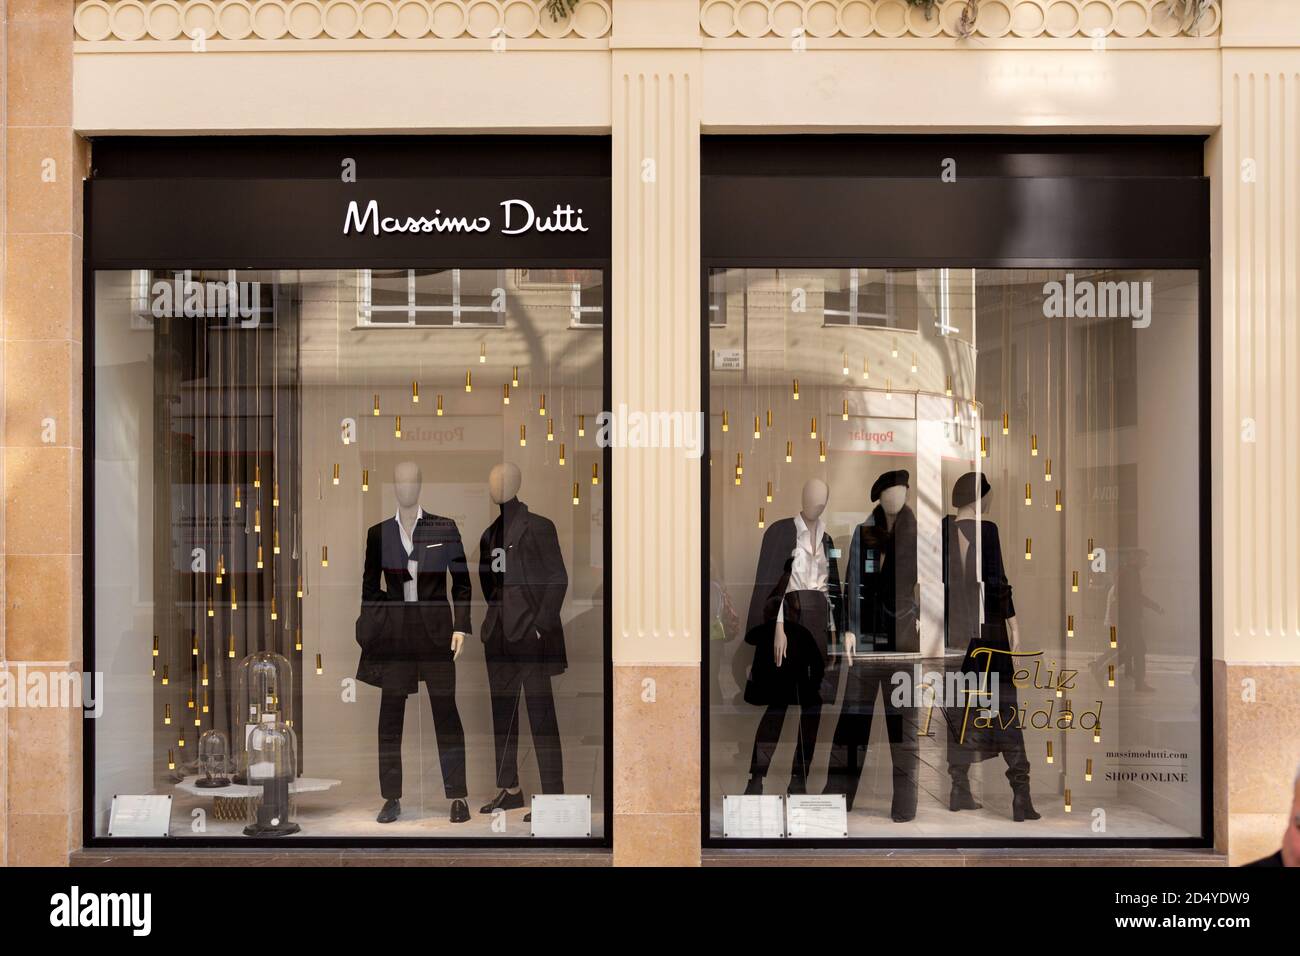 Massimo Dutti Shop High Resolution Stock Photography and Images - Alamy